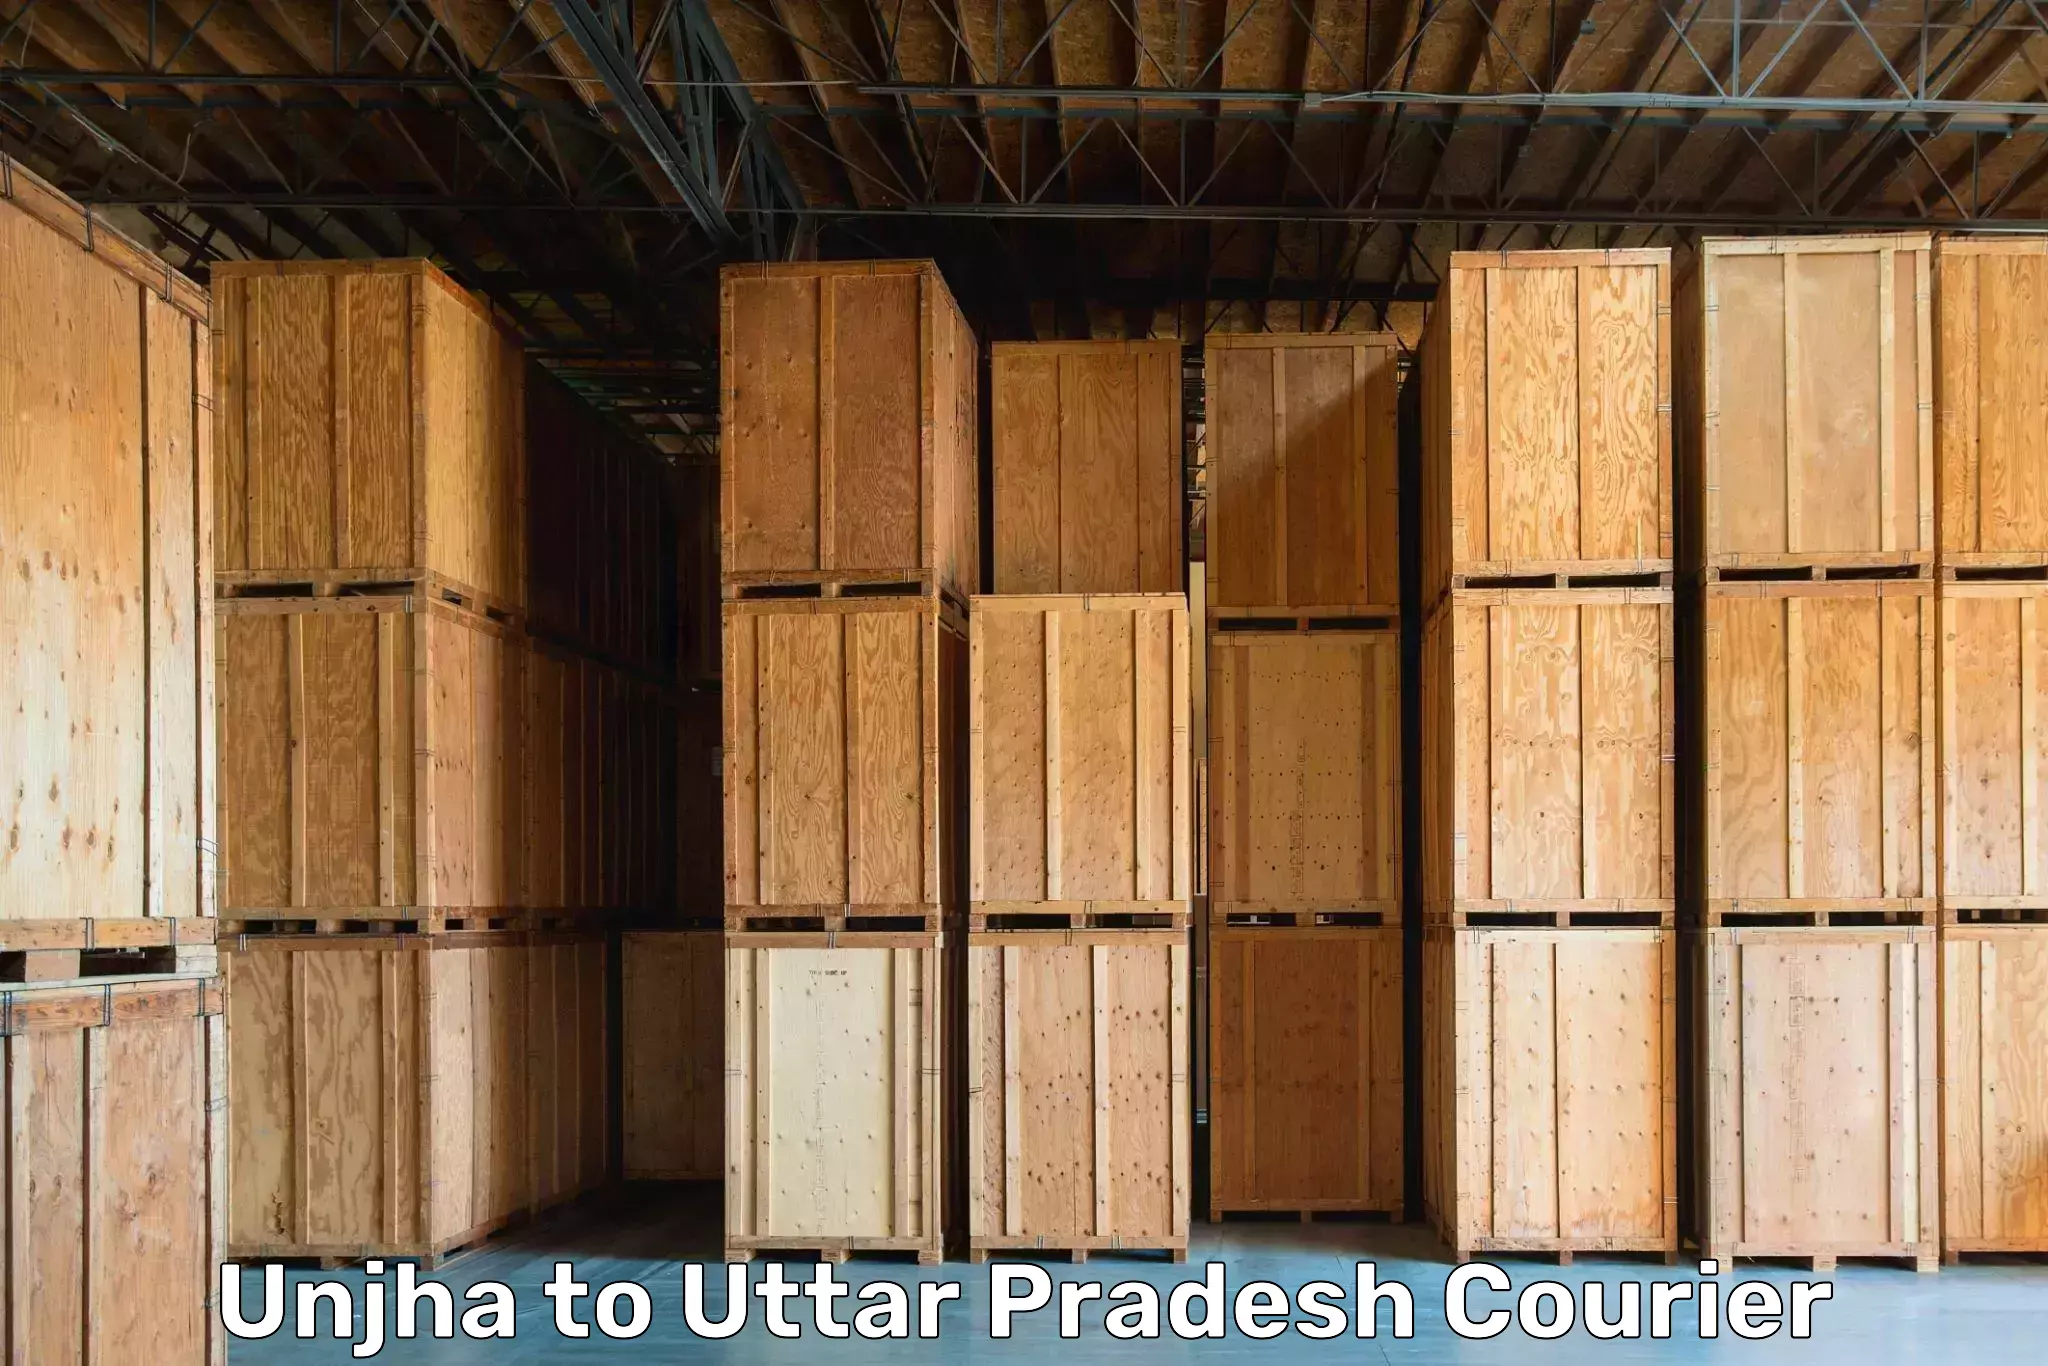 Moving and storage services in Unjha to Kerakat